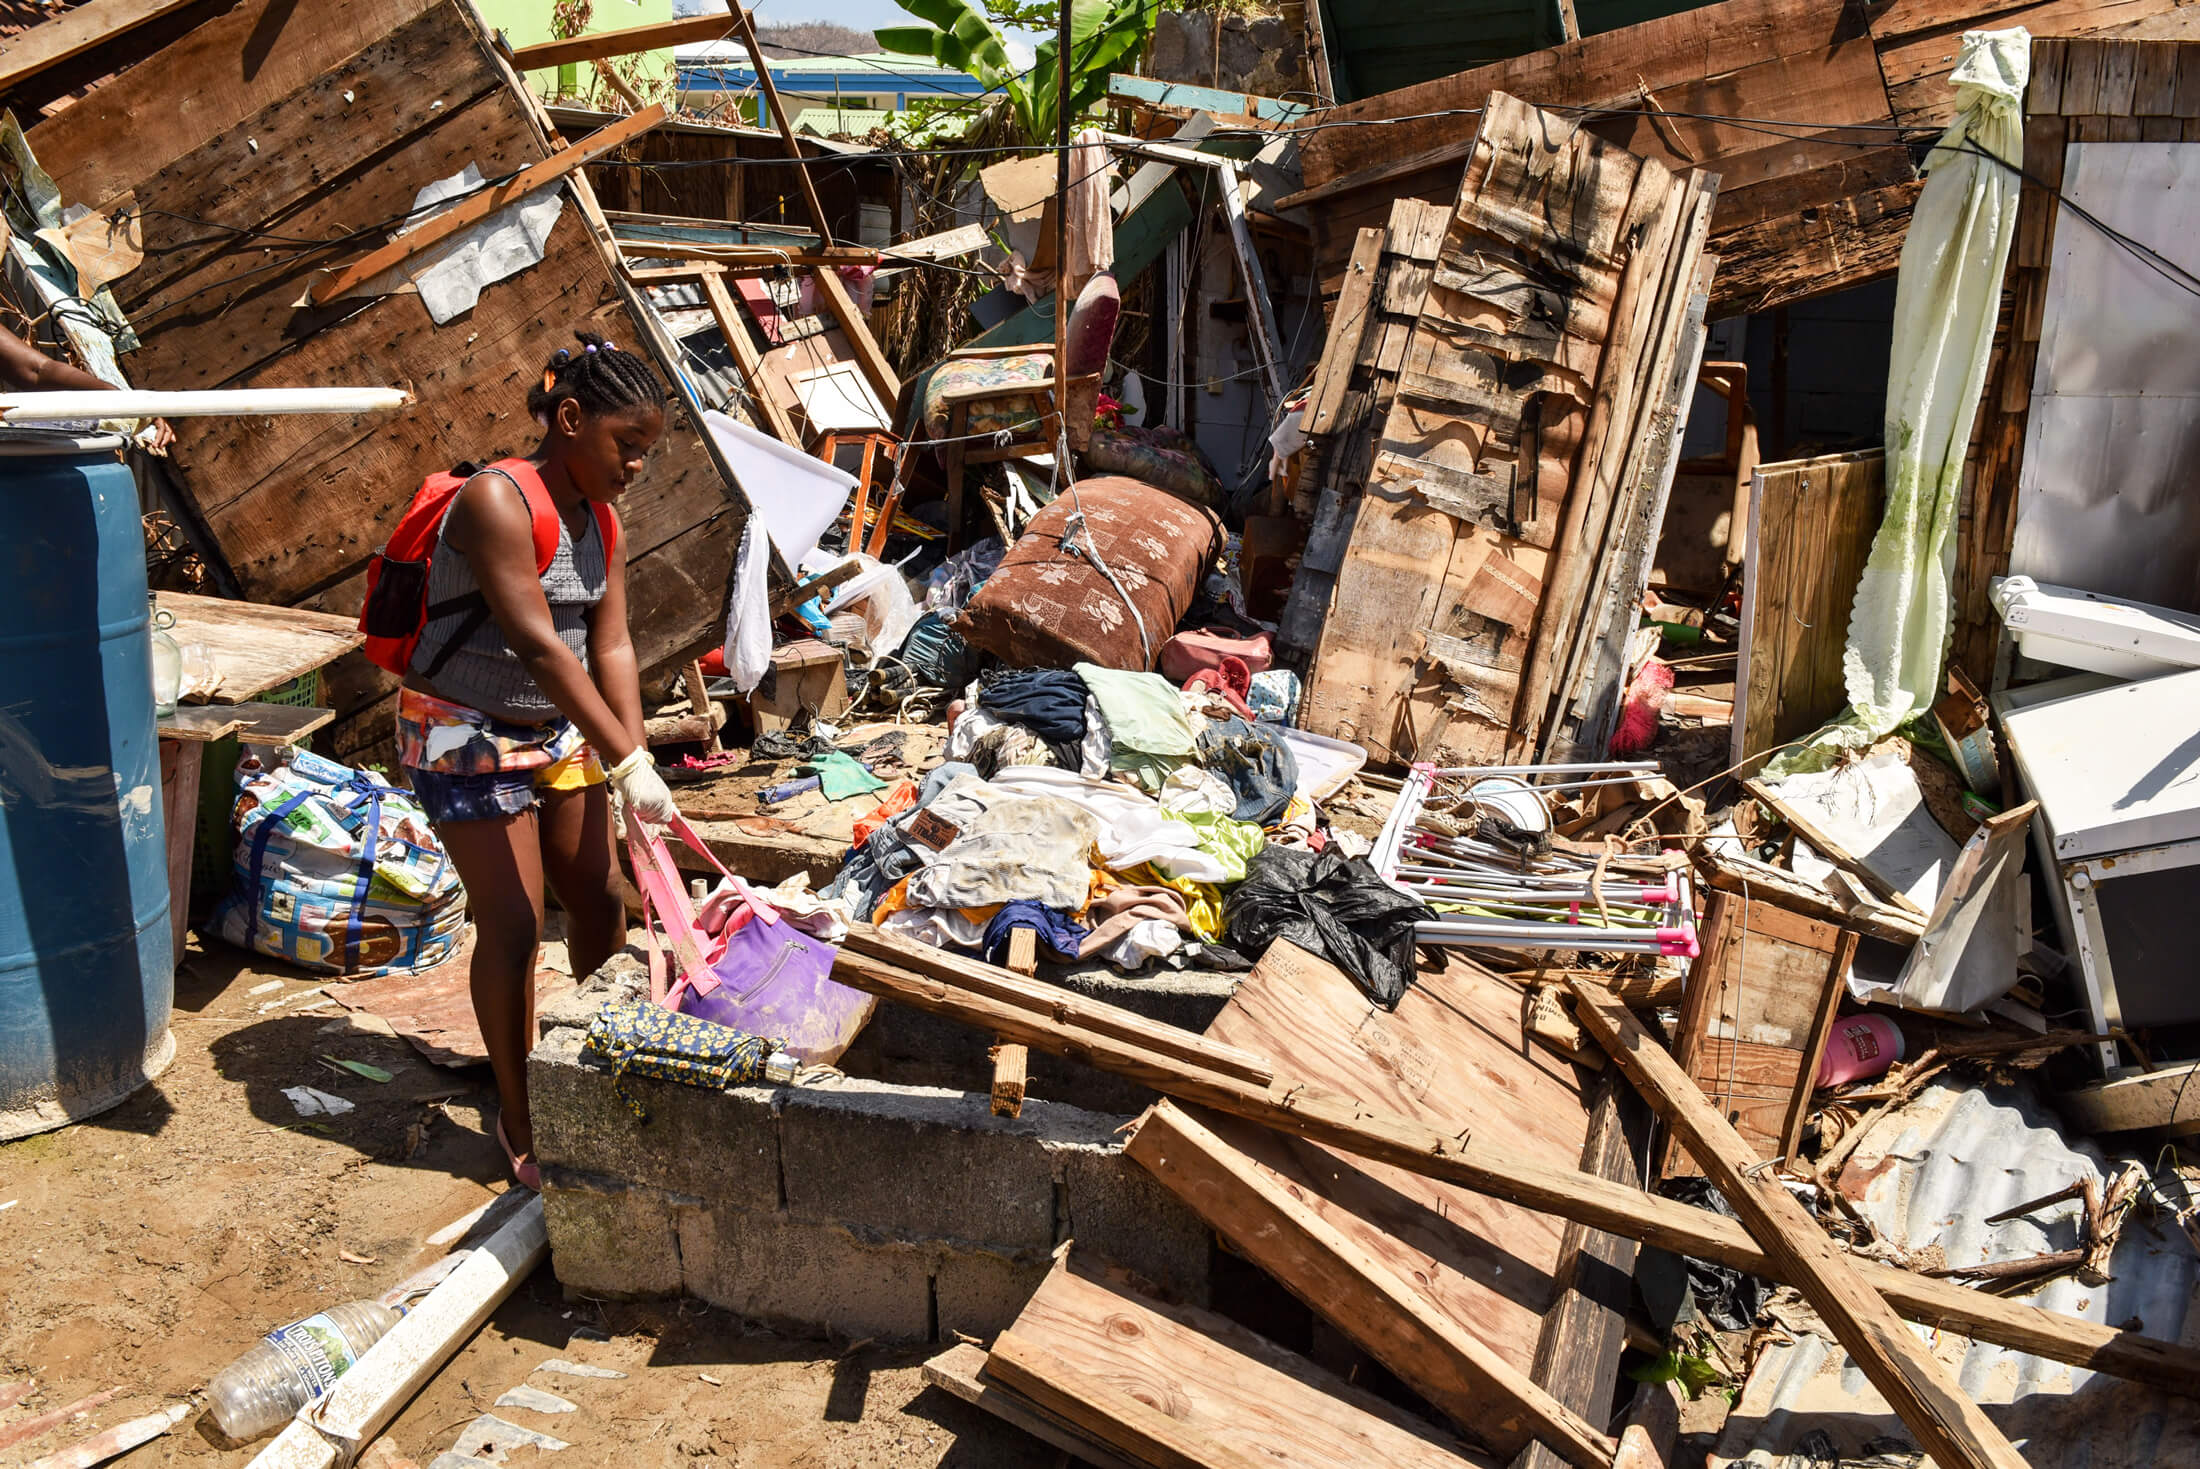 A woman picks through the remnants of a building destroyed by 2017’s Hurricane Maria, a Category 5 storm with winds of more than 175 mph that devastated communities across the Caribbean, caused more than $91 billion dollars in damage and killed more than 3,000 people.